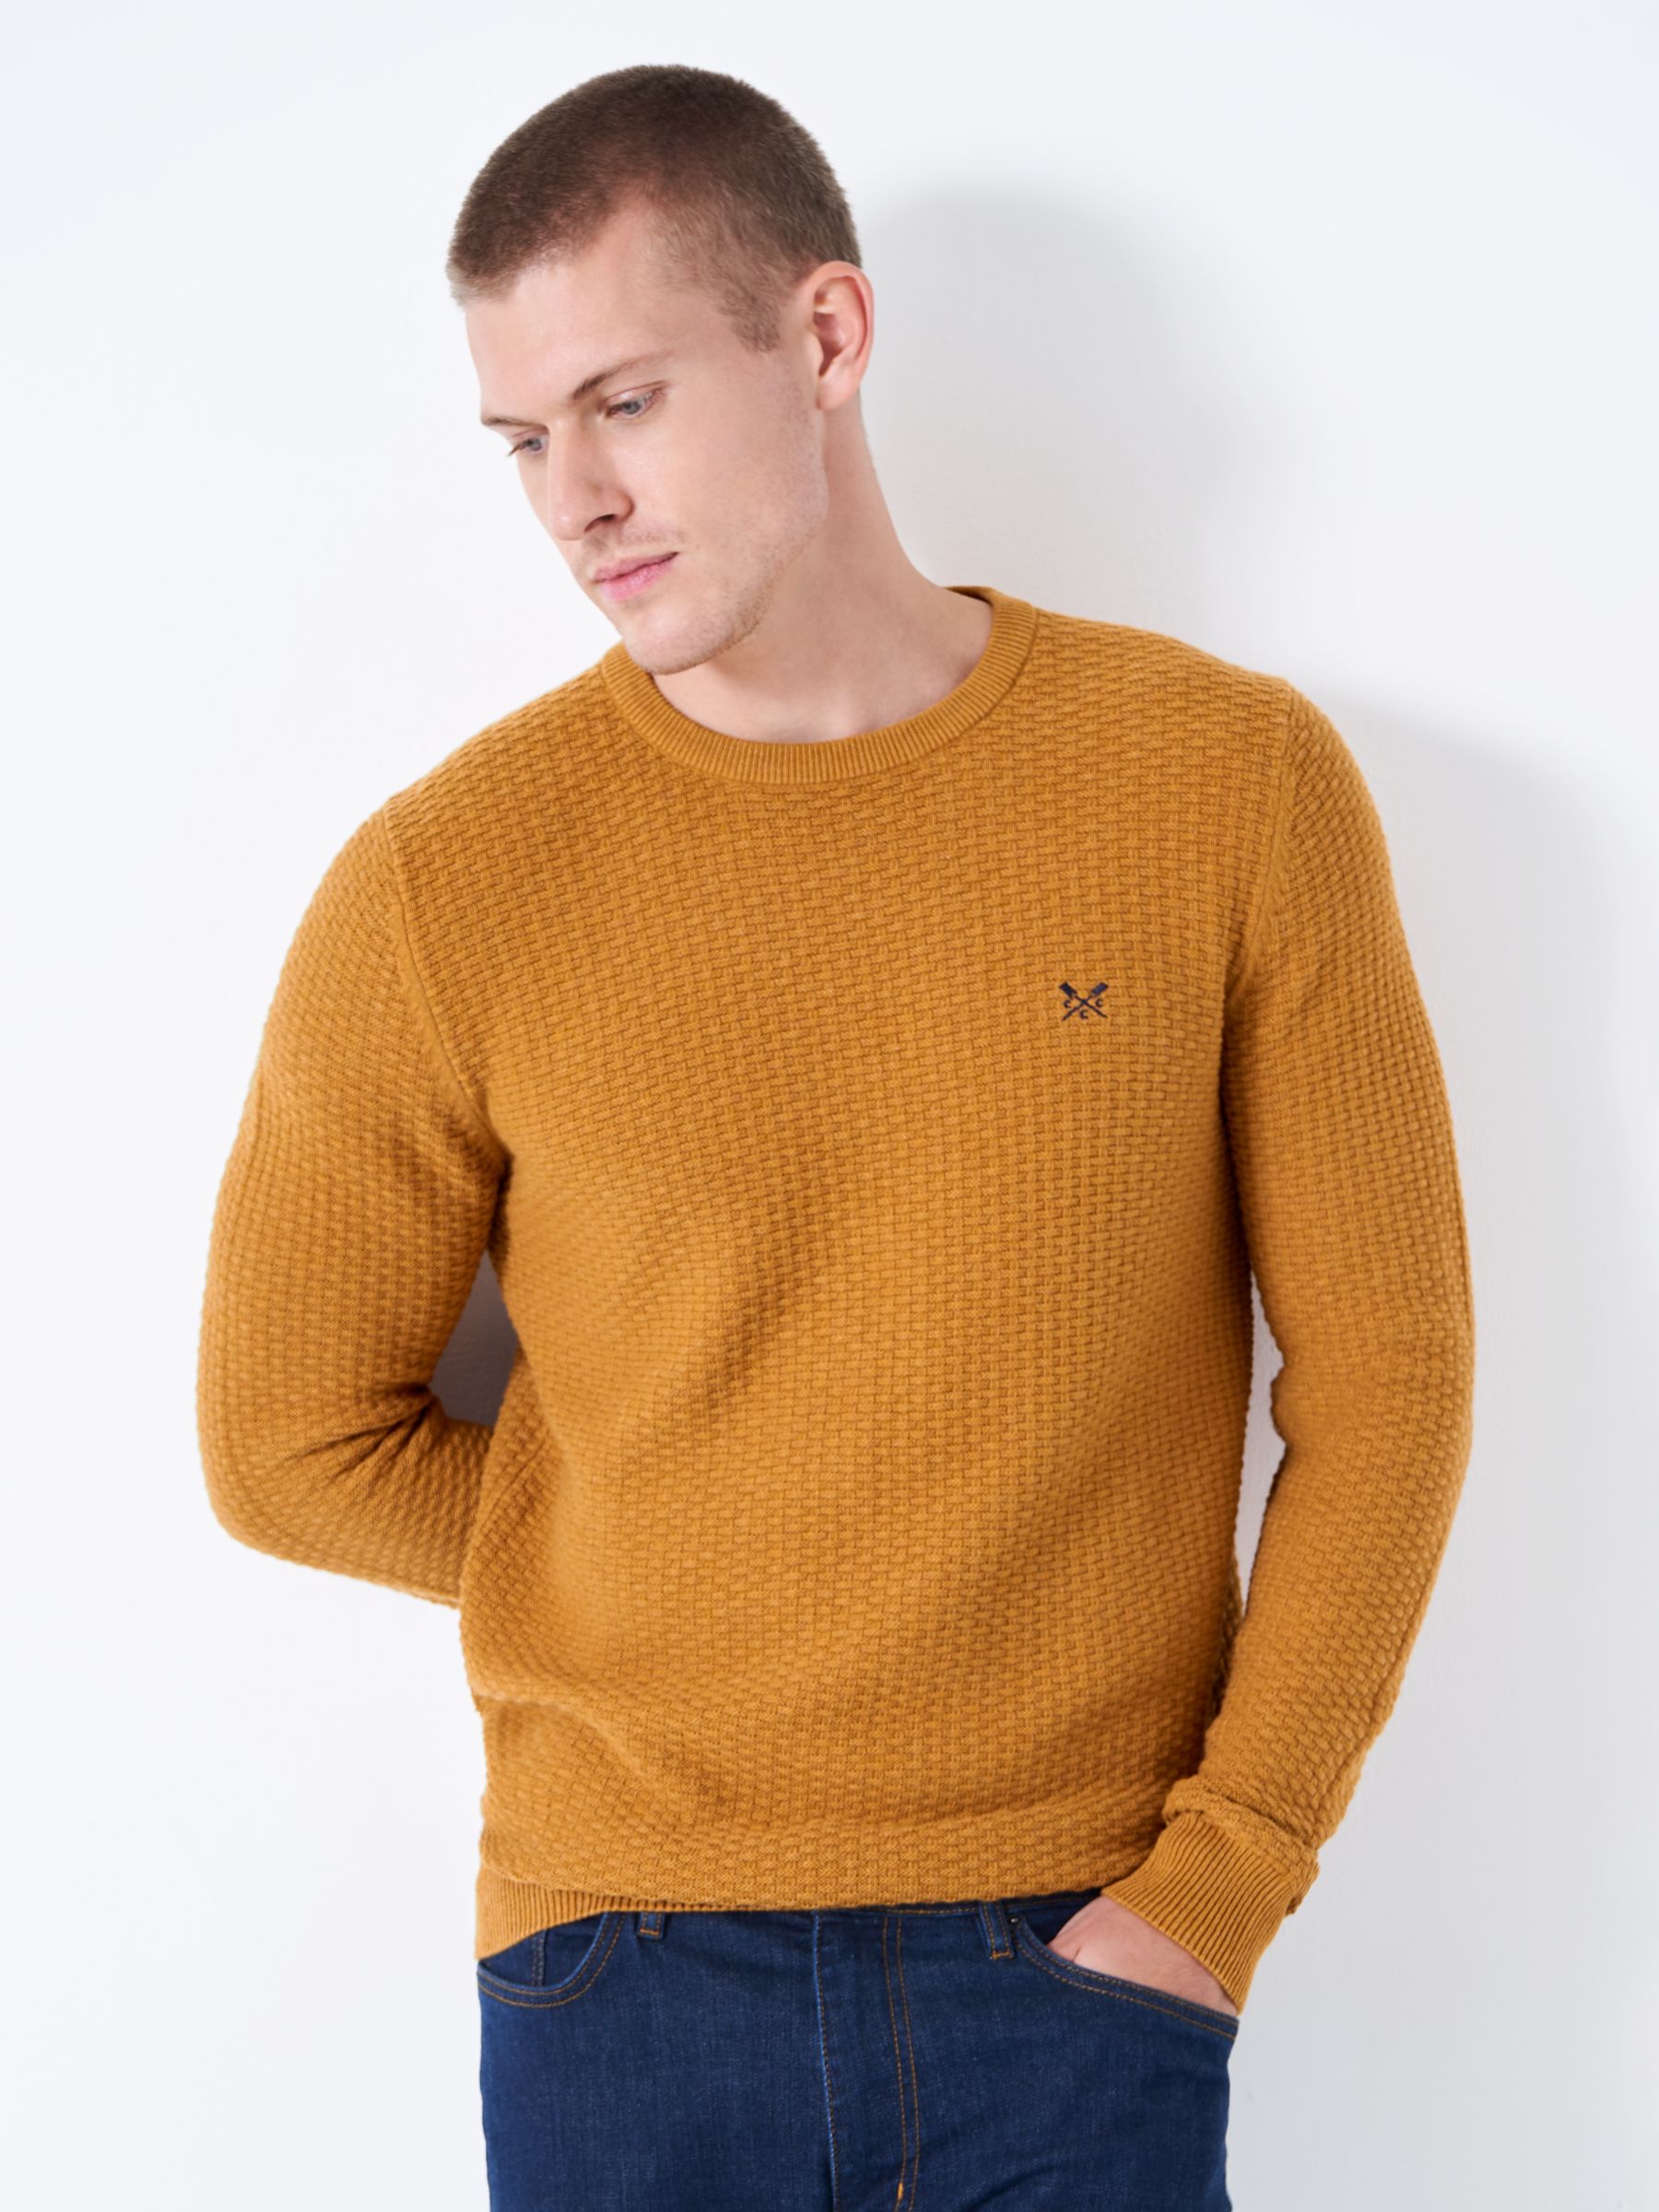 Buy Crew Clothing Breakwater Organic Cotton Knit Jumper, Yellow Online at johnlewis.com